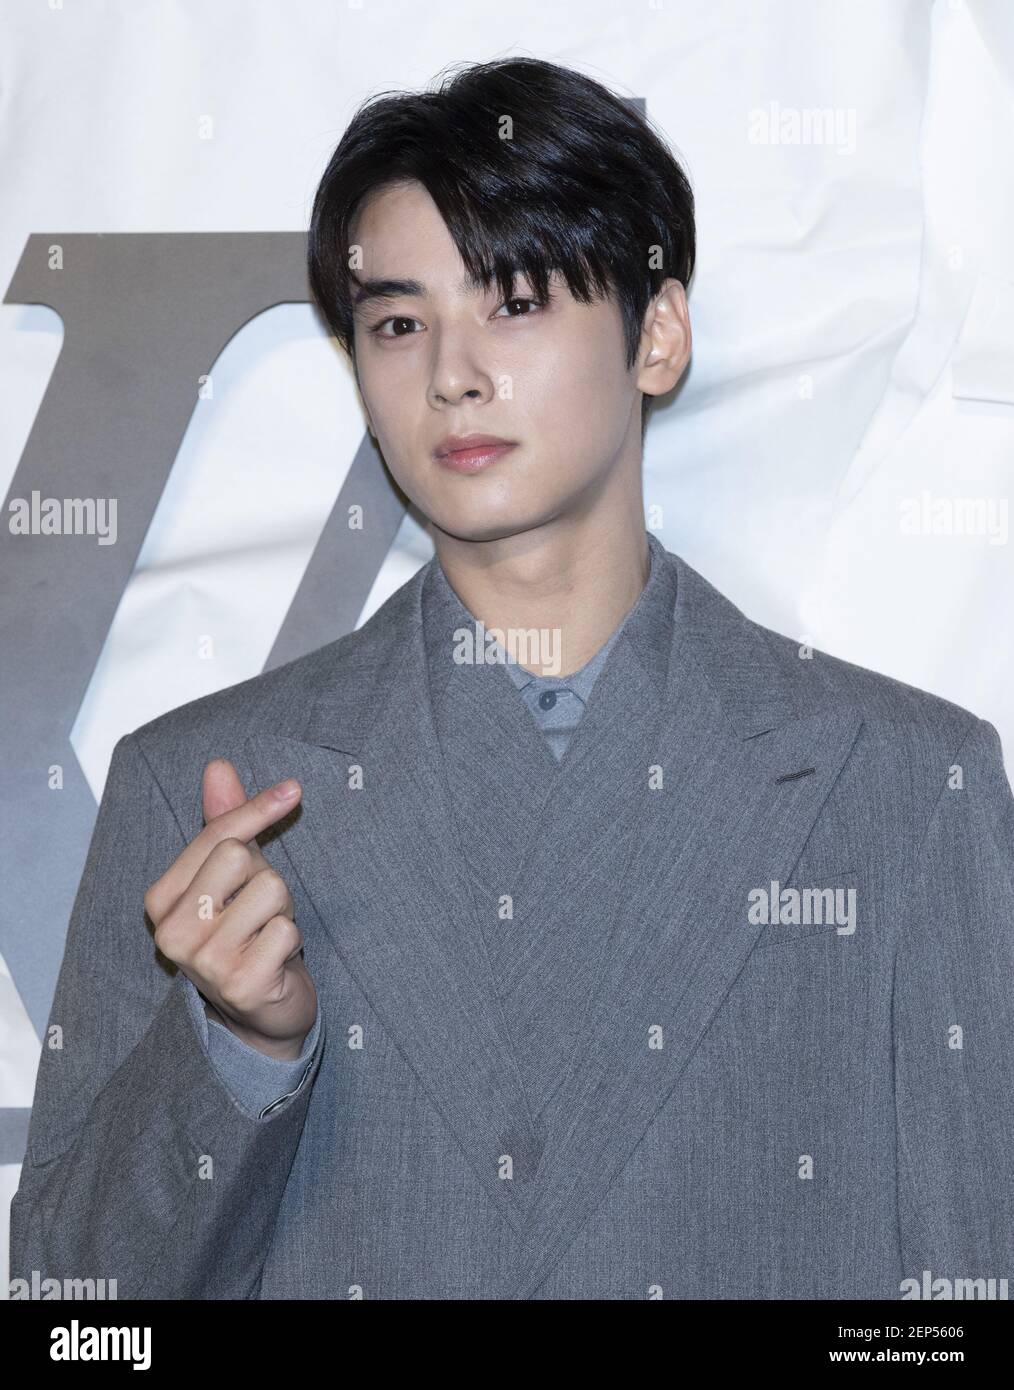 South Korean actor and singer Cha Eun-woo, member of South Korean boy group  Astro, attends a photo call for the Louis Vuitton launching at Louis Vuitton  Seoul in Seoul, South Korea on